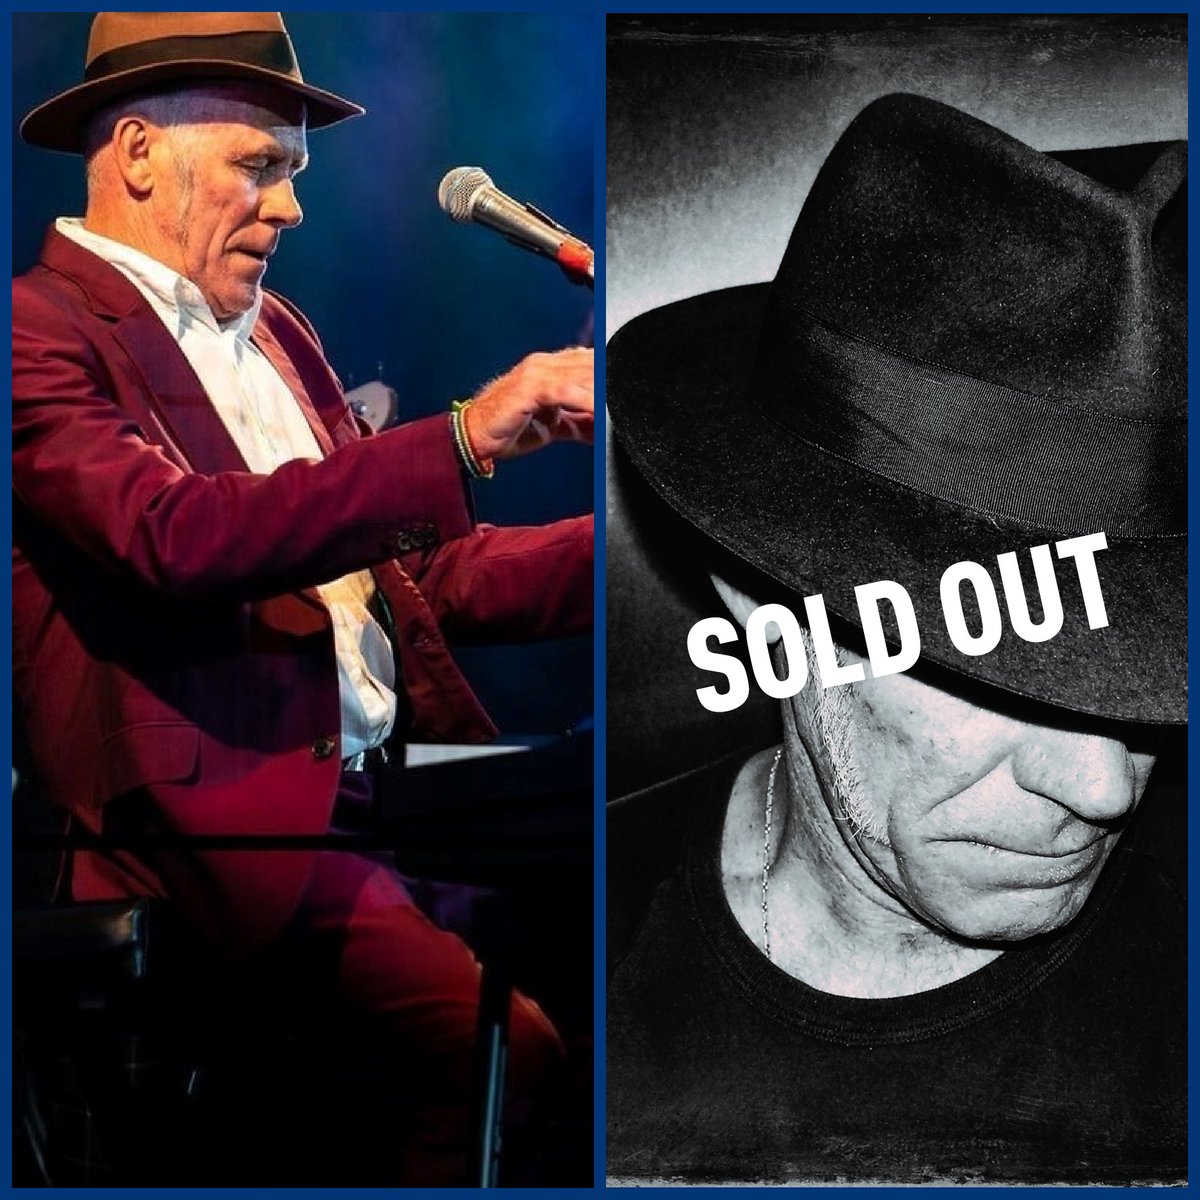 TONIGHT: We welcome My Leonard Cohen, performed by Stewart D'Arrietta & His Band for a Sold Out concert. TOMORROW: There are tickets left for Tom Waits for No Man, where we welcome back D’Aritetta to perform Waits legendary songs. Thu 16 May | Book: tinyurl.com/TomWaitsNoManM…